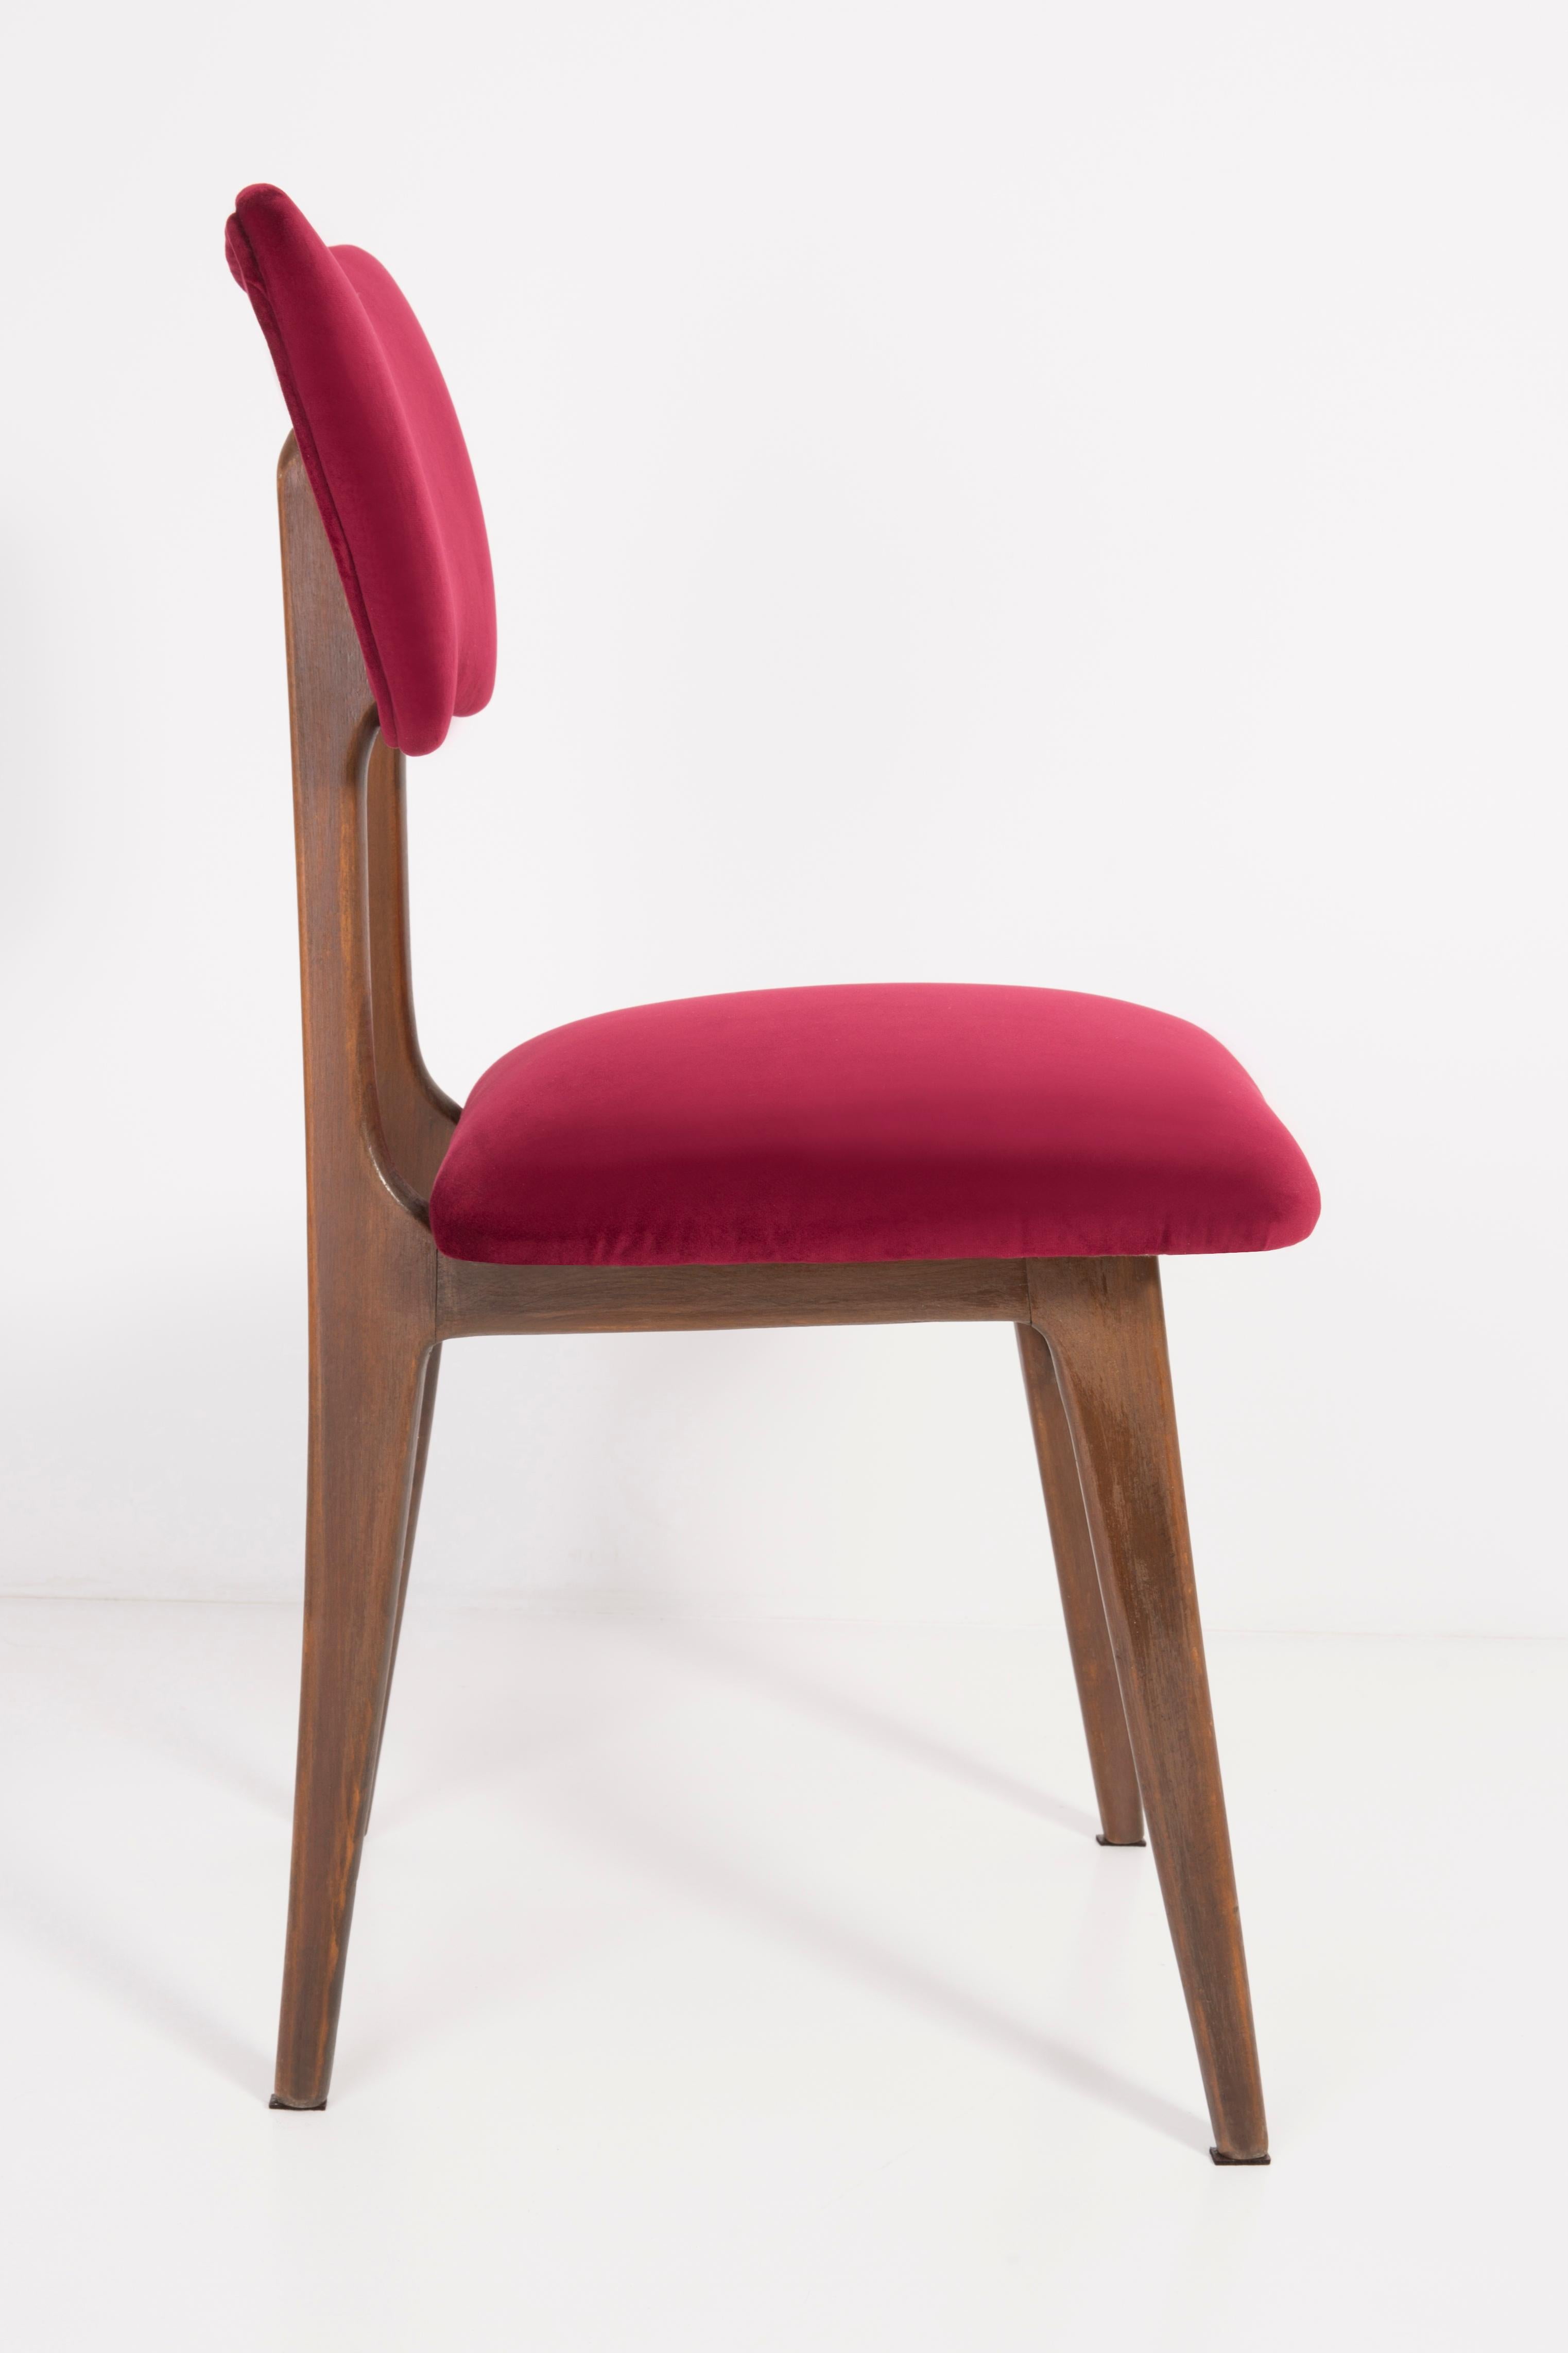 20th Century Burgundy Red Chair, 1960s For Sale 3